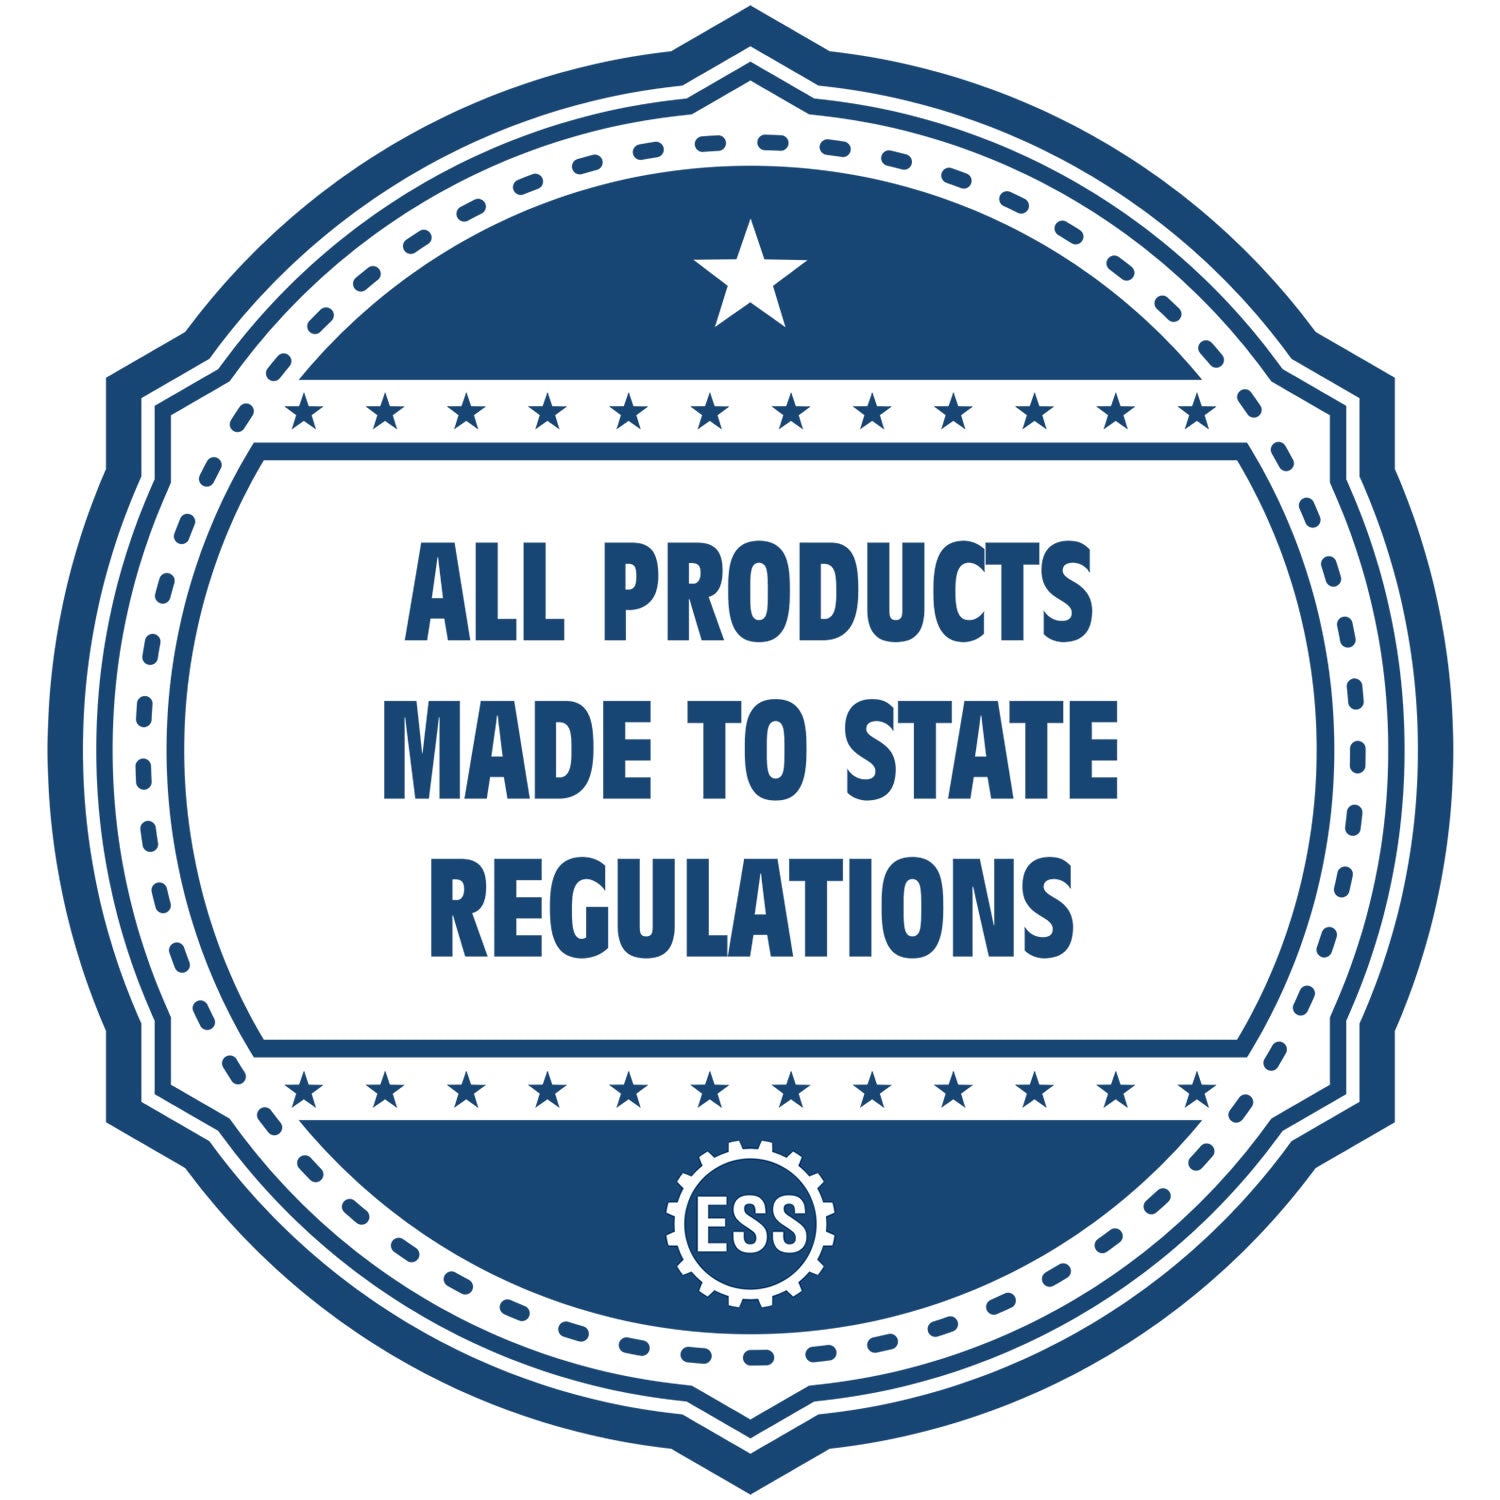 An icon or badge element for the Kentucky Desk Landscape Architectural Seal Embosser showing that this product is made in compliance with state regulations.